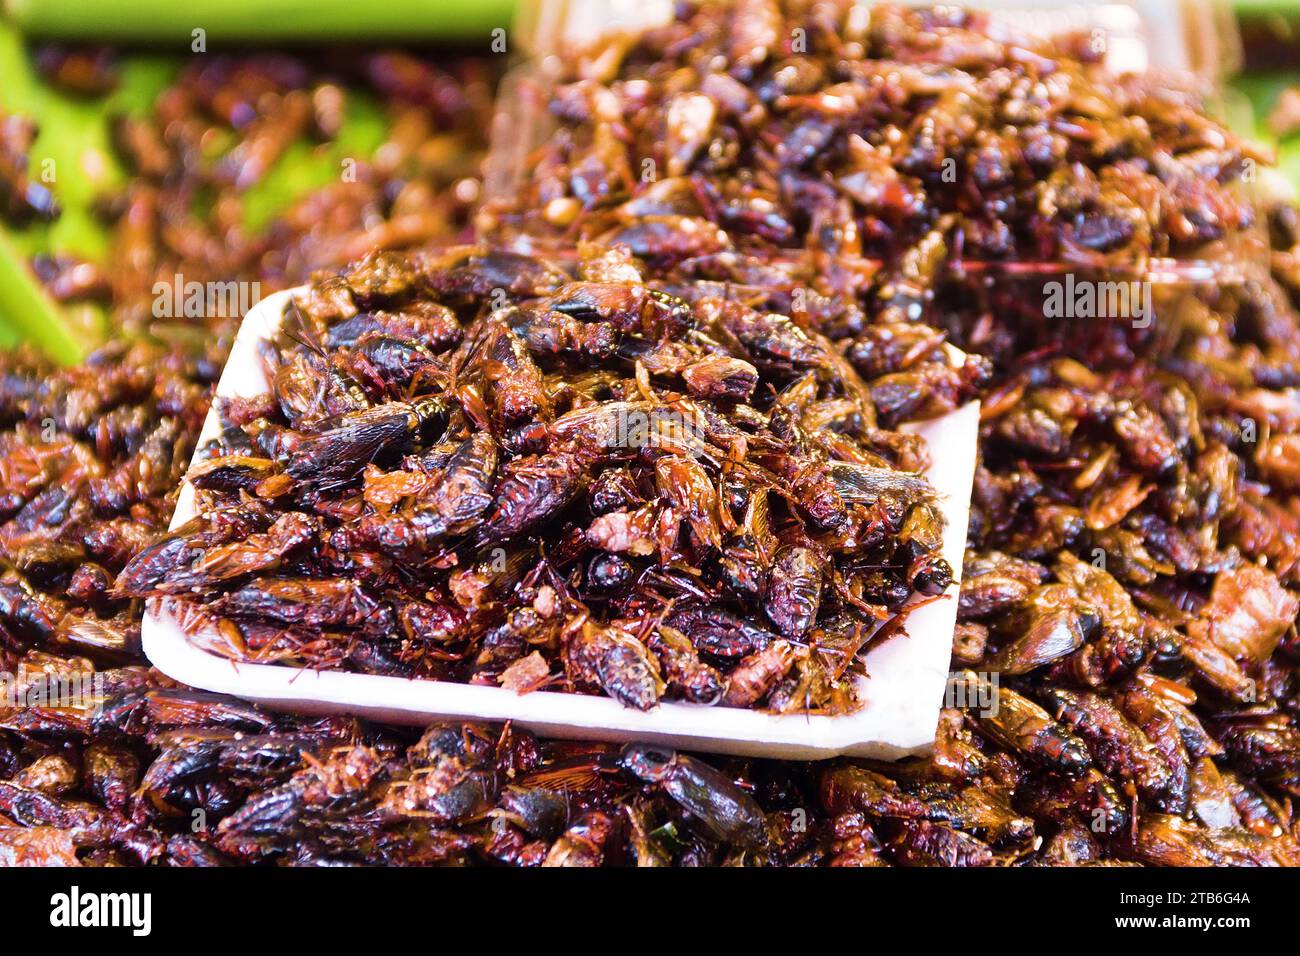 Exotic Asian food. Thai ancient cuisine. Fried insect, beetles imago Stock Photo